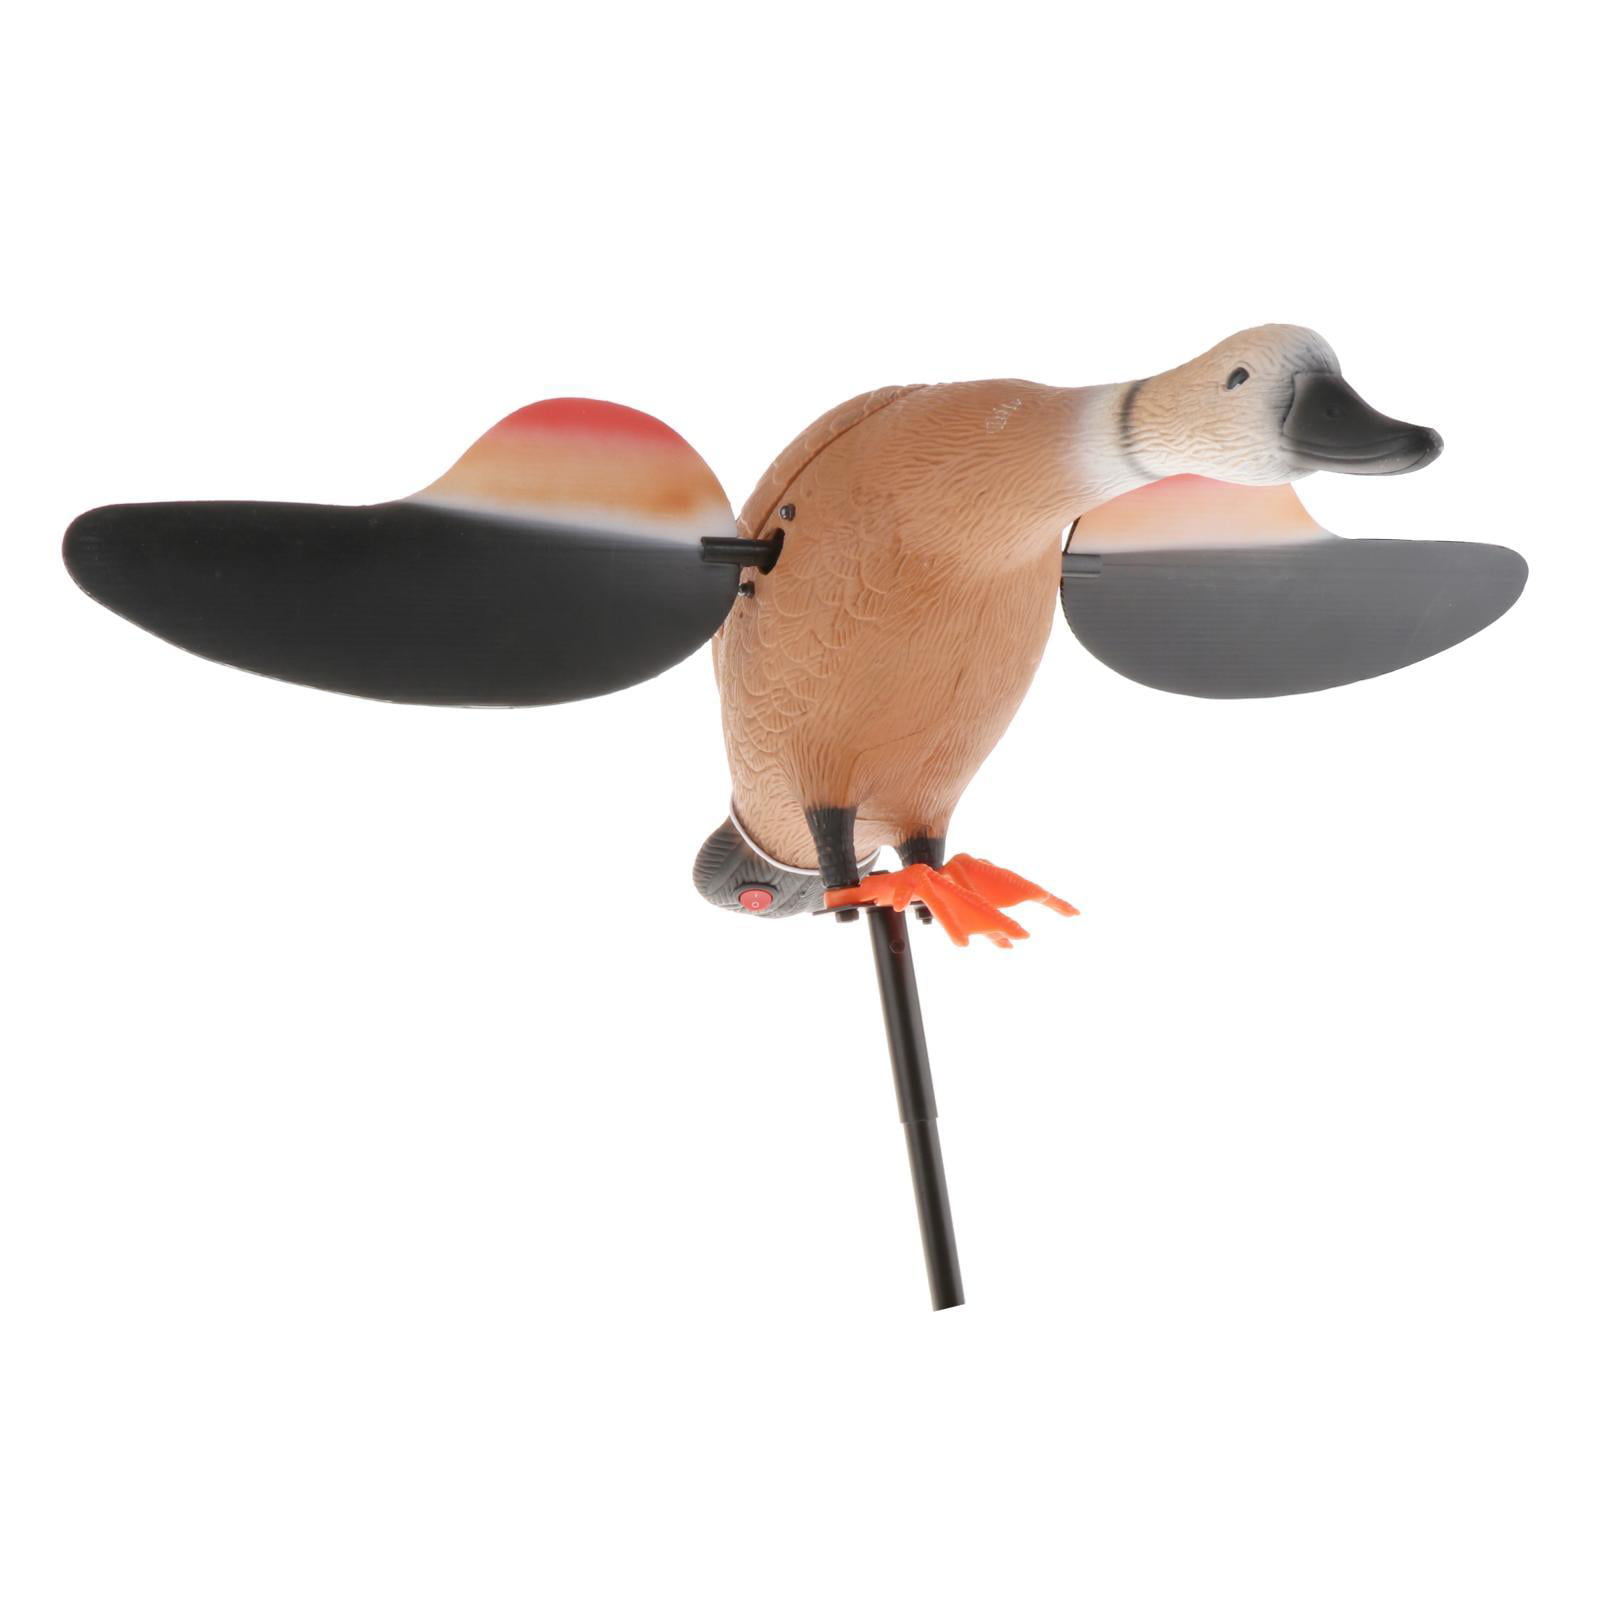 Details about   Hunting Motion Duck Mallard Spinning Wing Drake Decoy Shooting Lure Garden Pond 